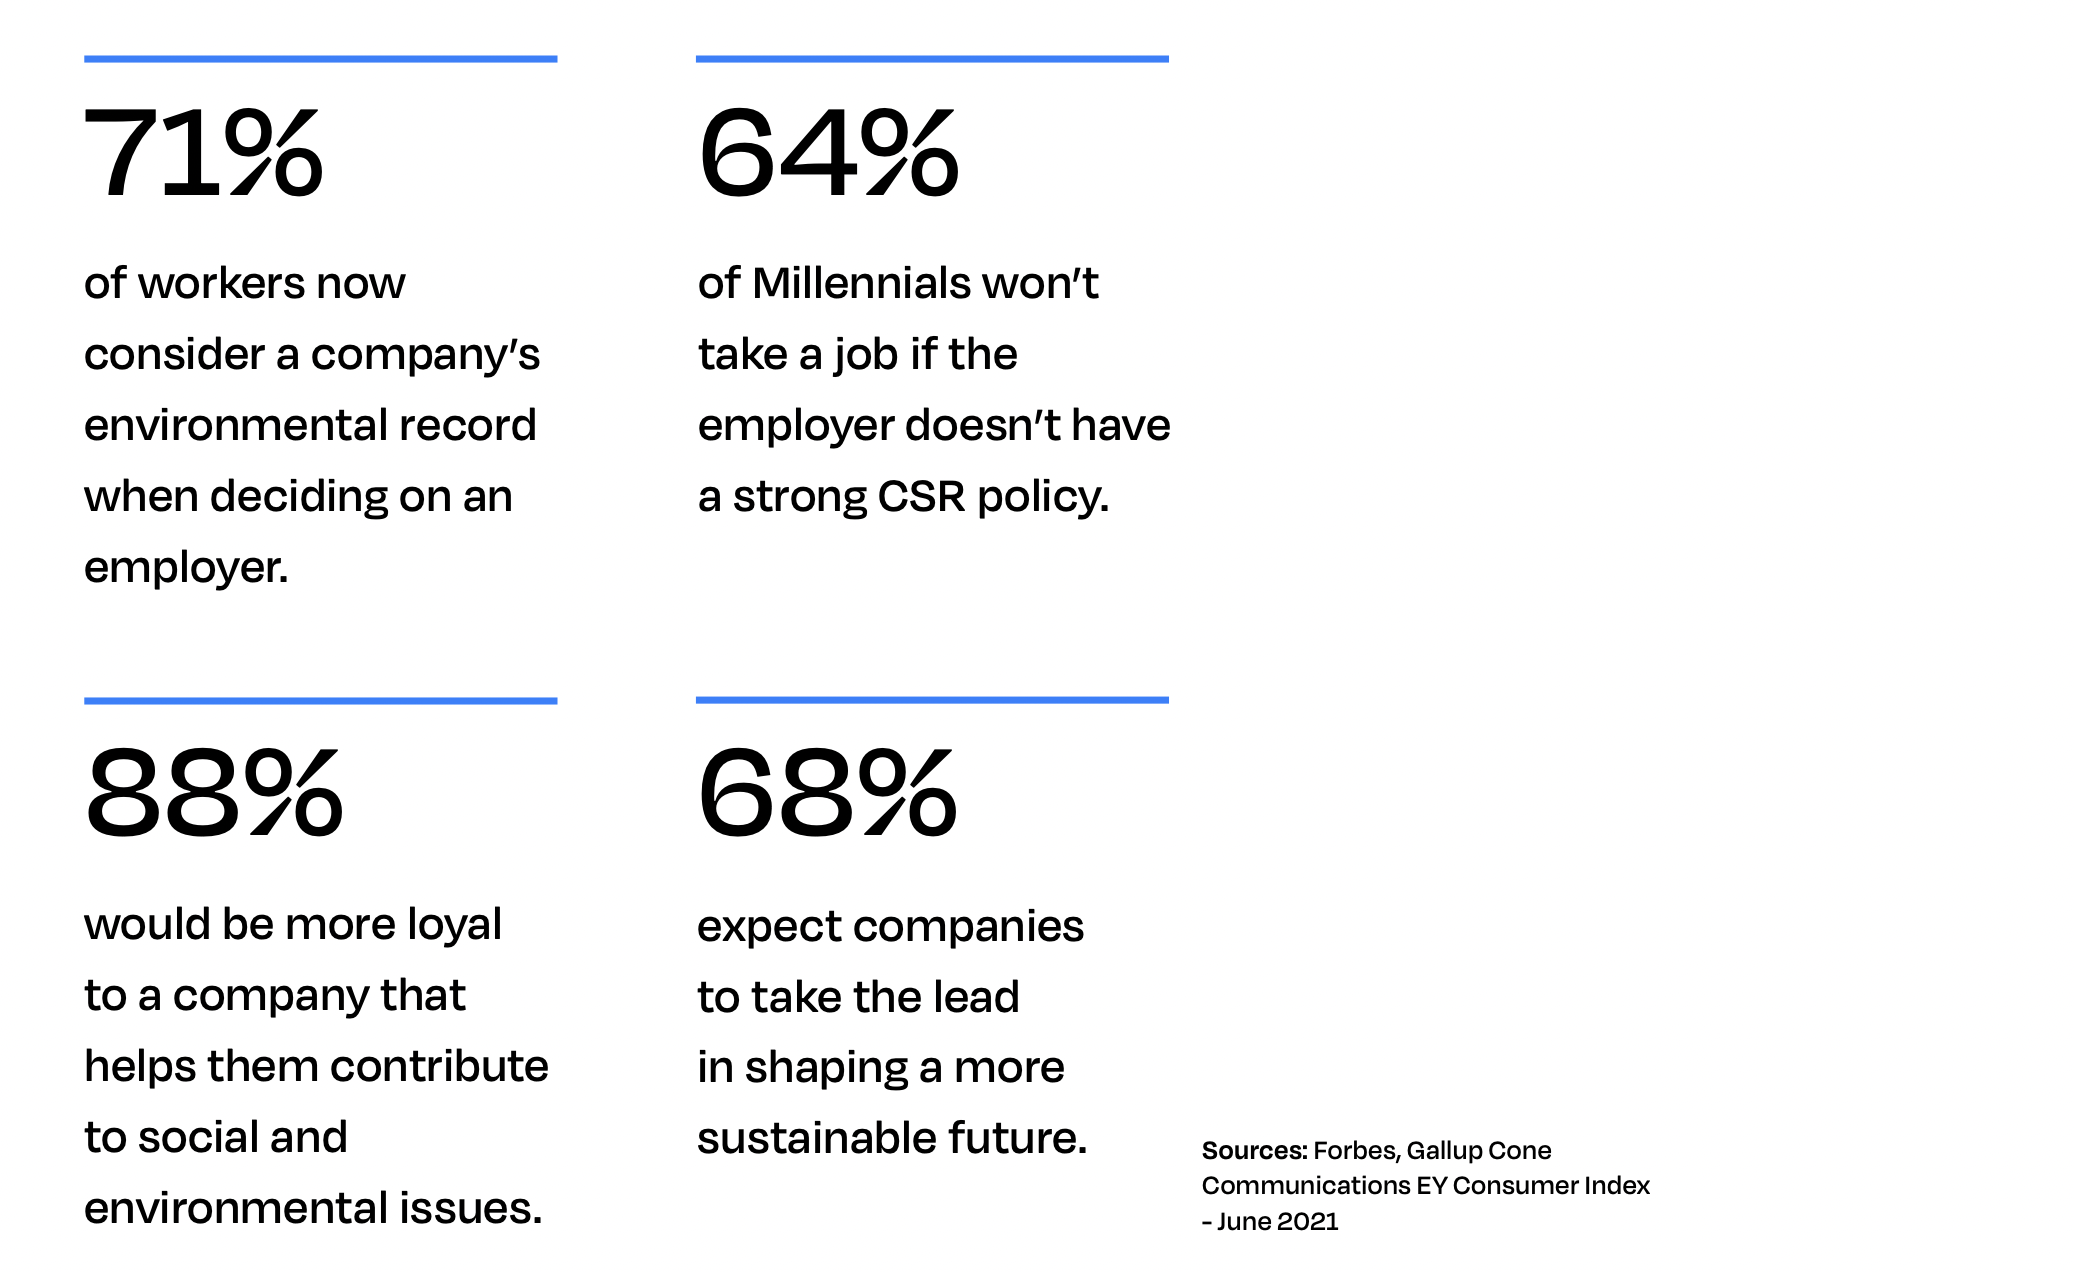 Statistics from report detailing the percentage of workers who expect companies to take a lead in shaping a sustainable future